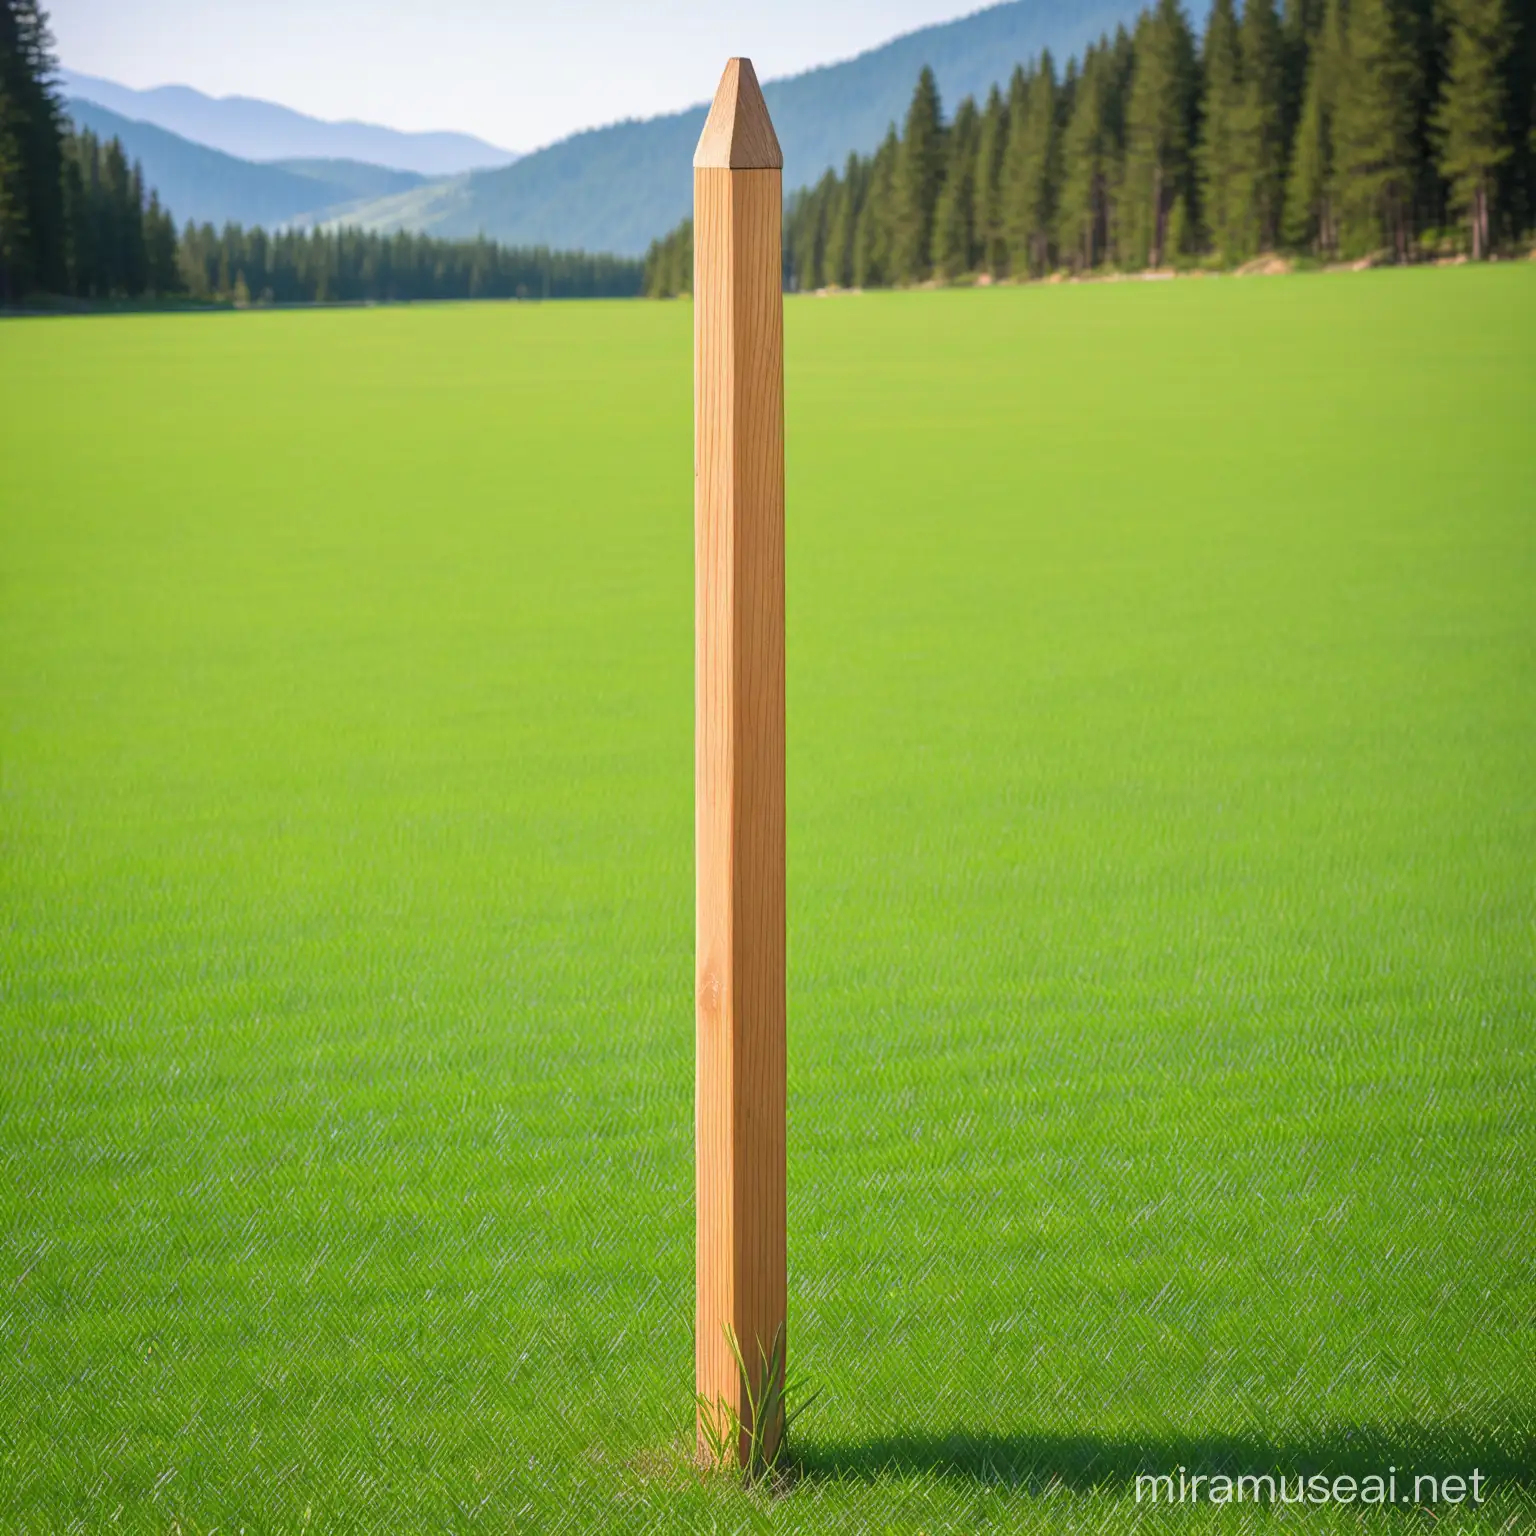 Rustic Wooden Stake in the Wilderness